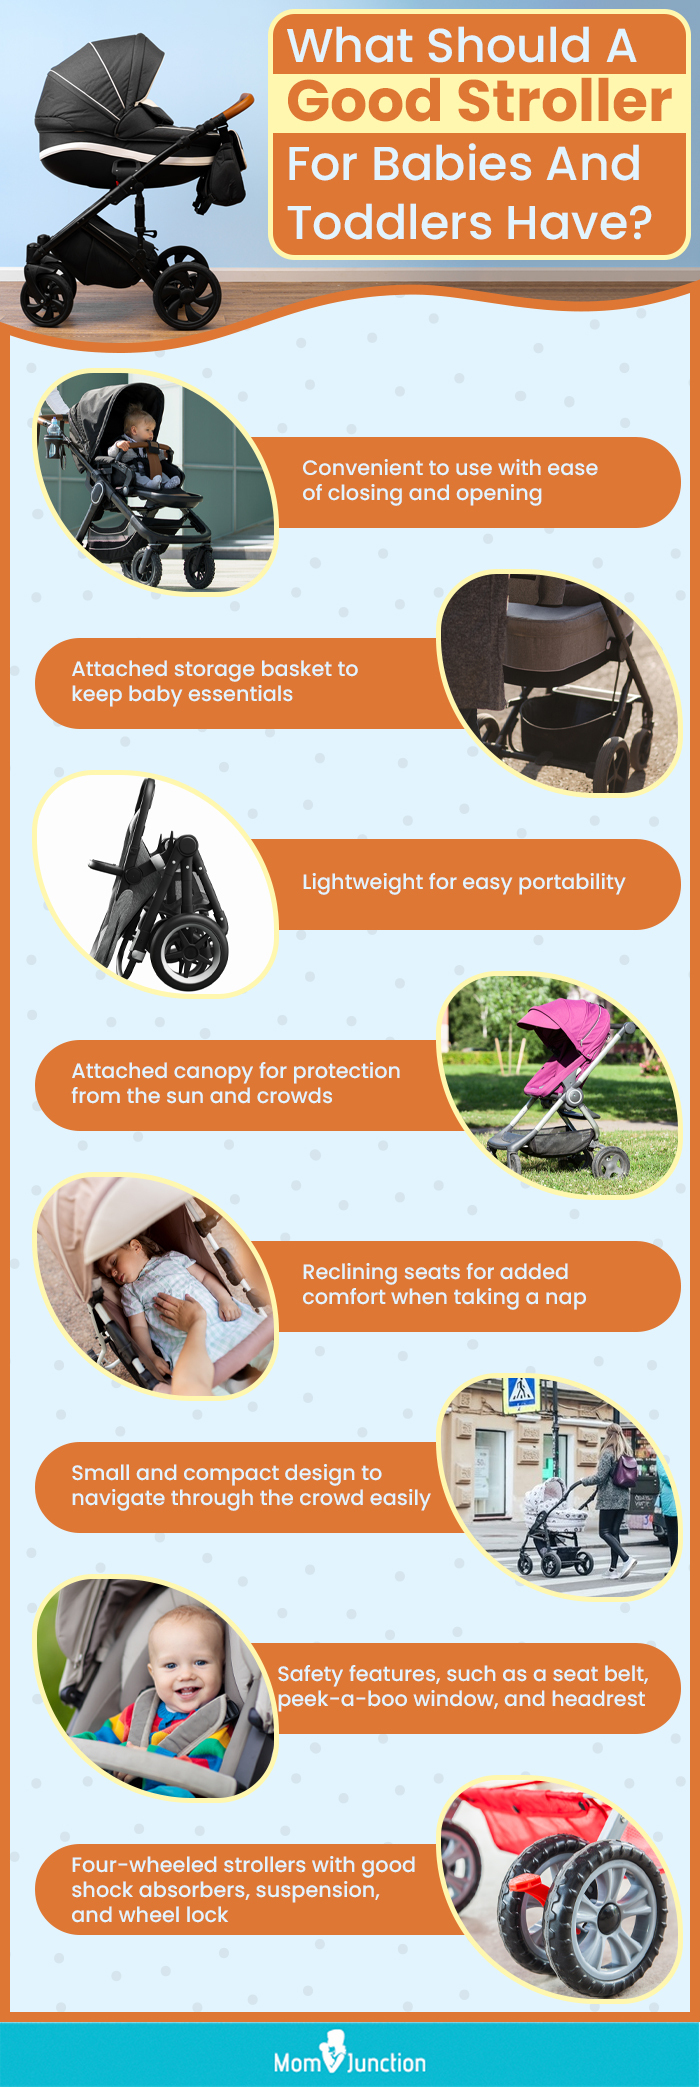 What Should A Good Stroller For Babies And Toddlers Have (infographic)